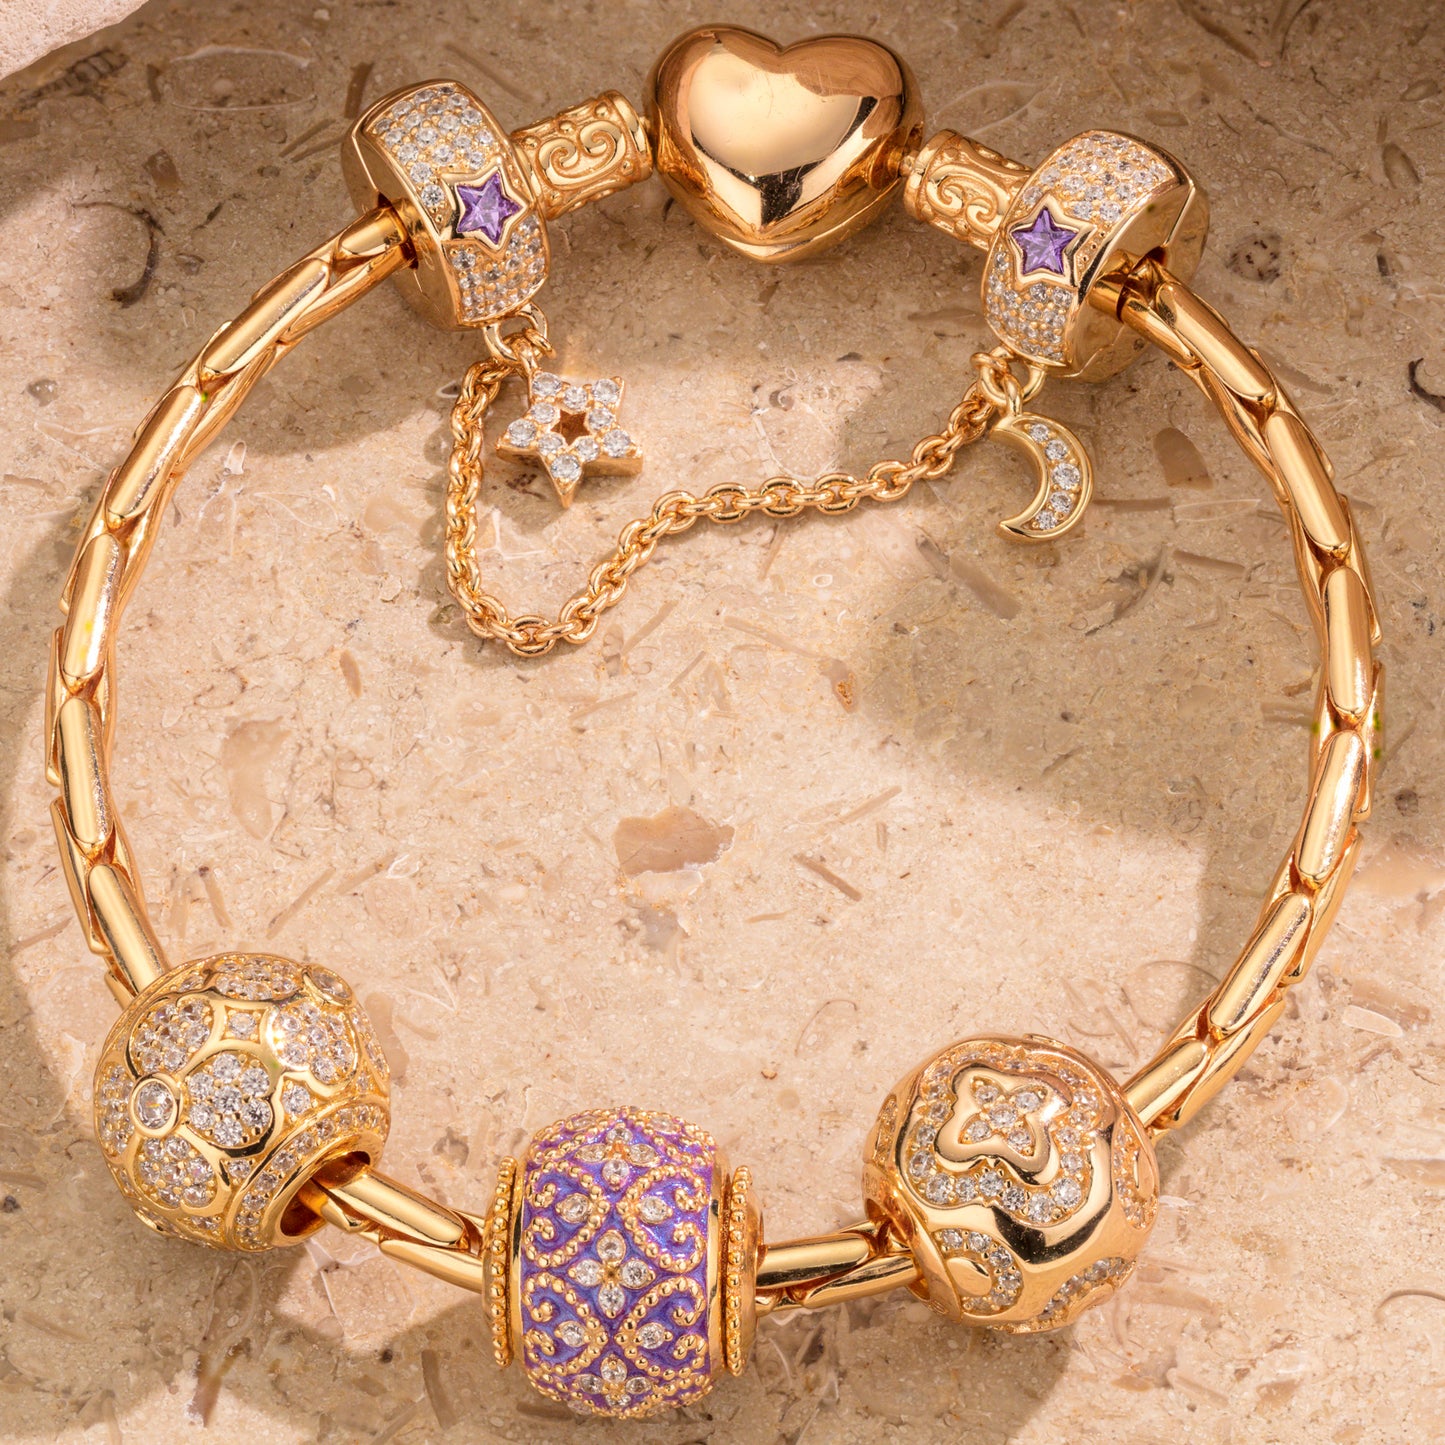 Sterling Silver Purple Luck Charms Bracelet Set With Enamel In 14K Gold Plated